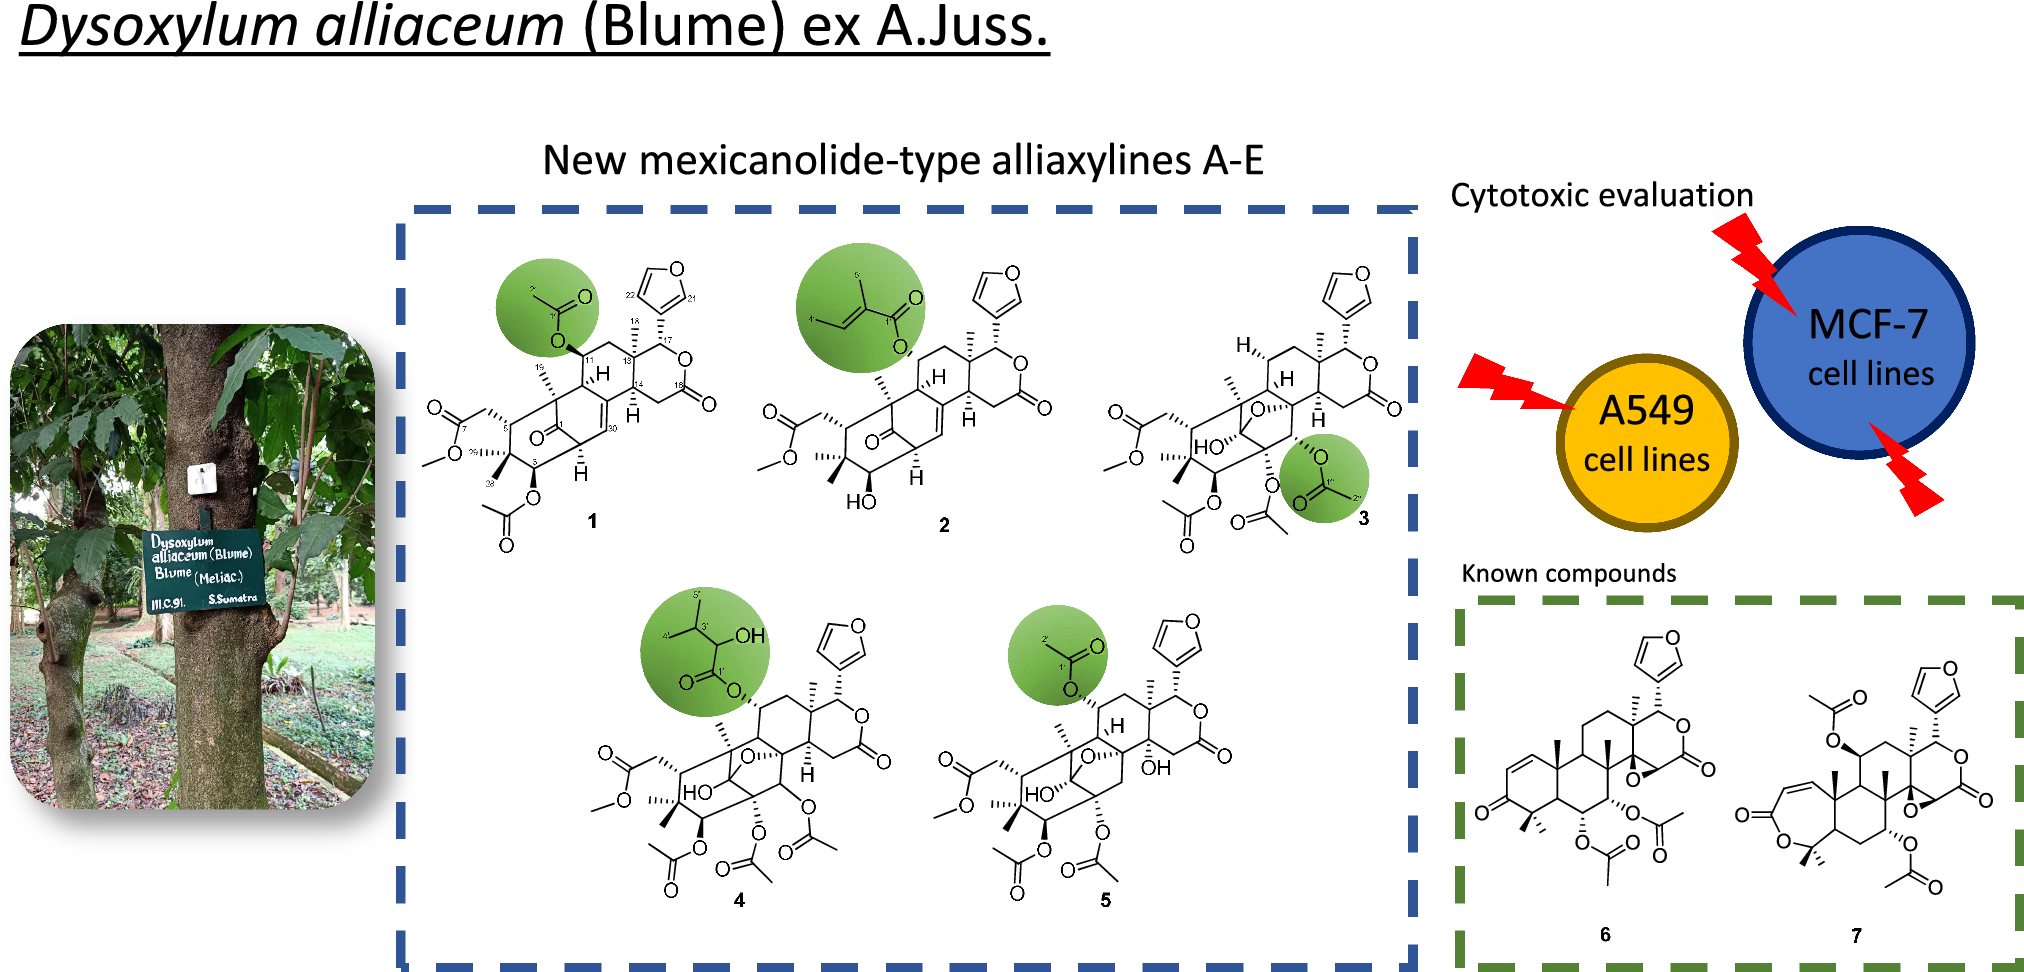 Alliaxylines A–E: five new mexicanolides from the stem barks of Dysoxylum alliaceum (Blume) Blume ex A.Juss